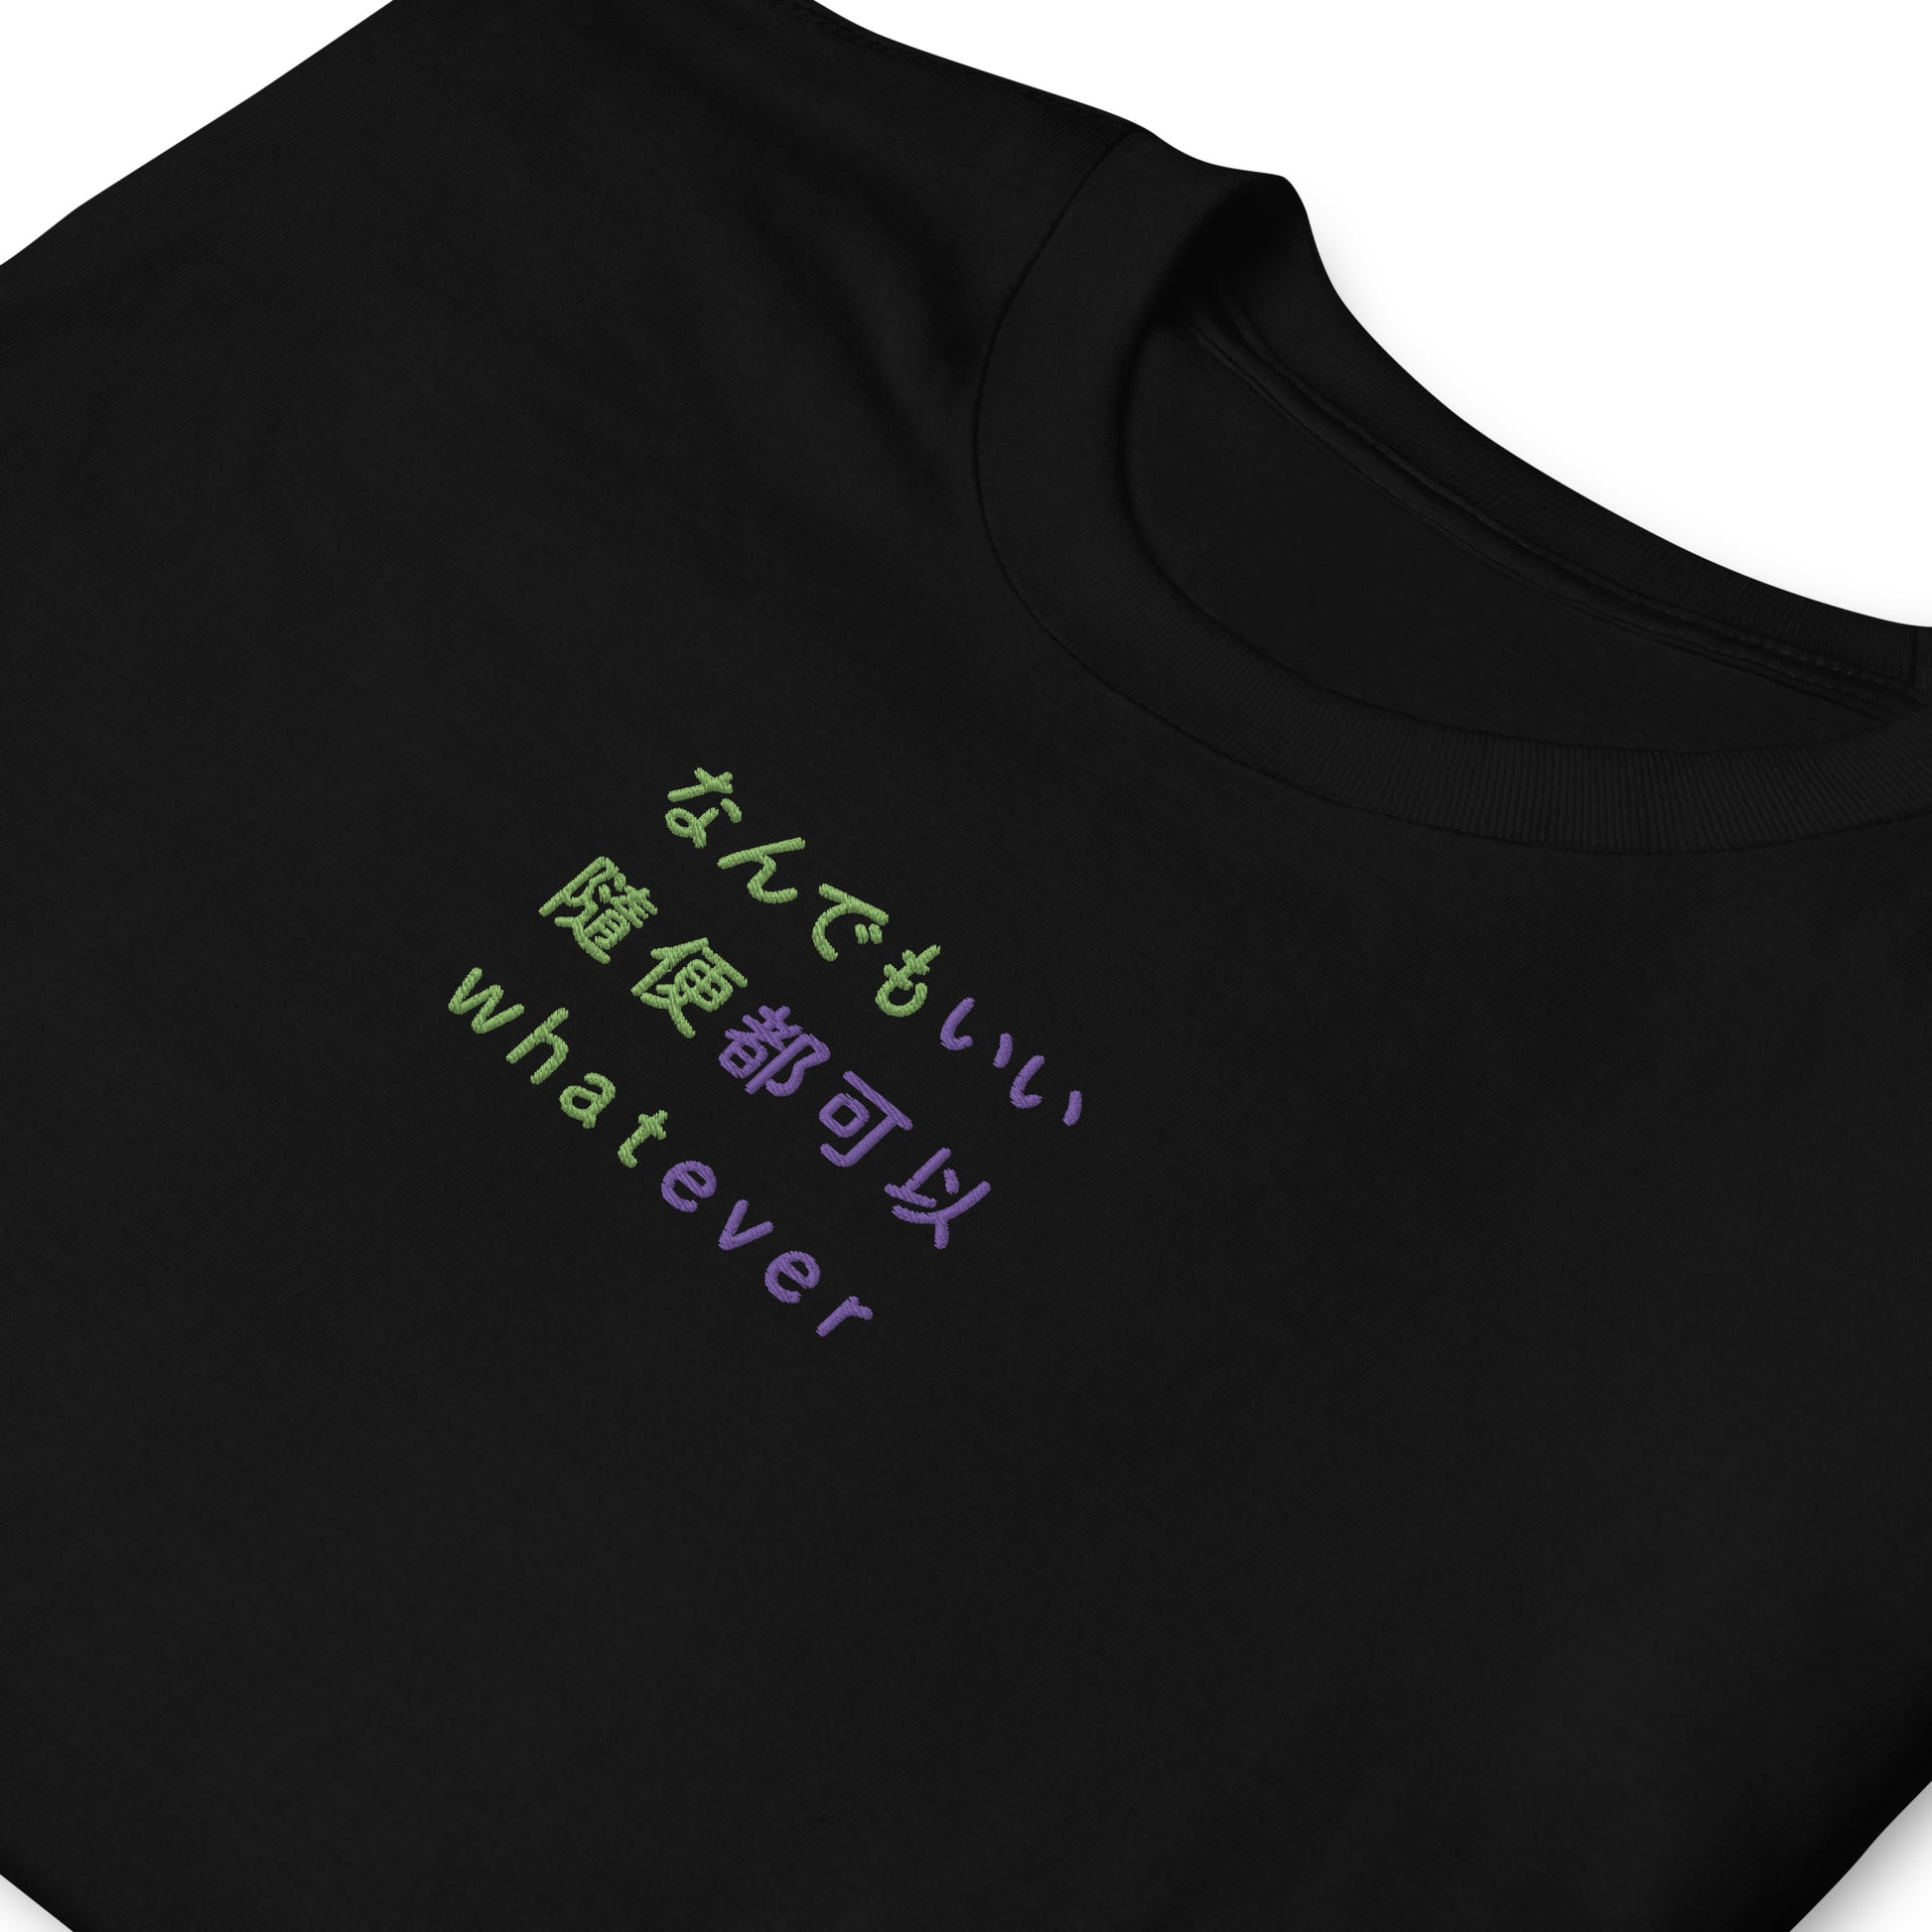 Black High Quality Tee - Front Design with an Green,Purple Embroidery "Whatever" in Japanese,Chinese and English